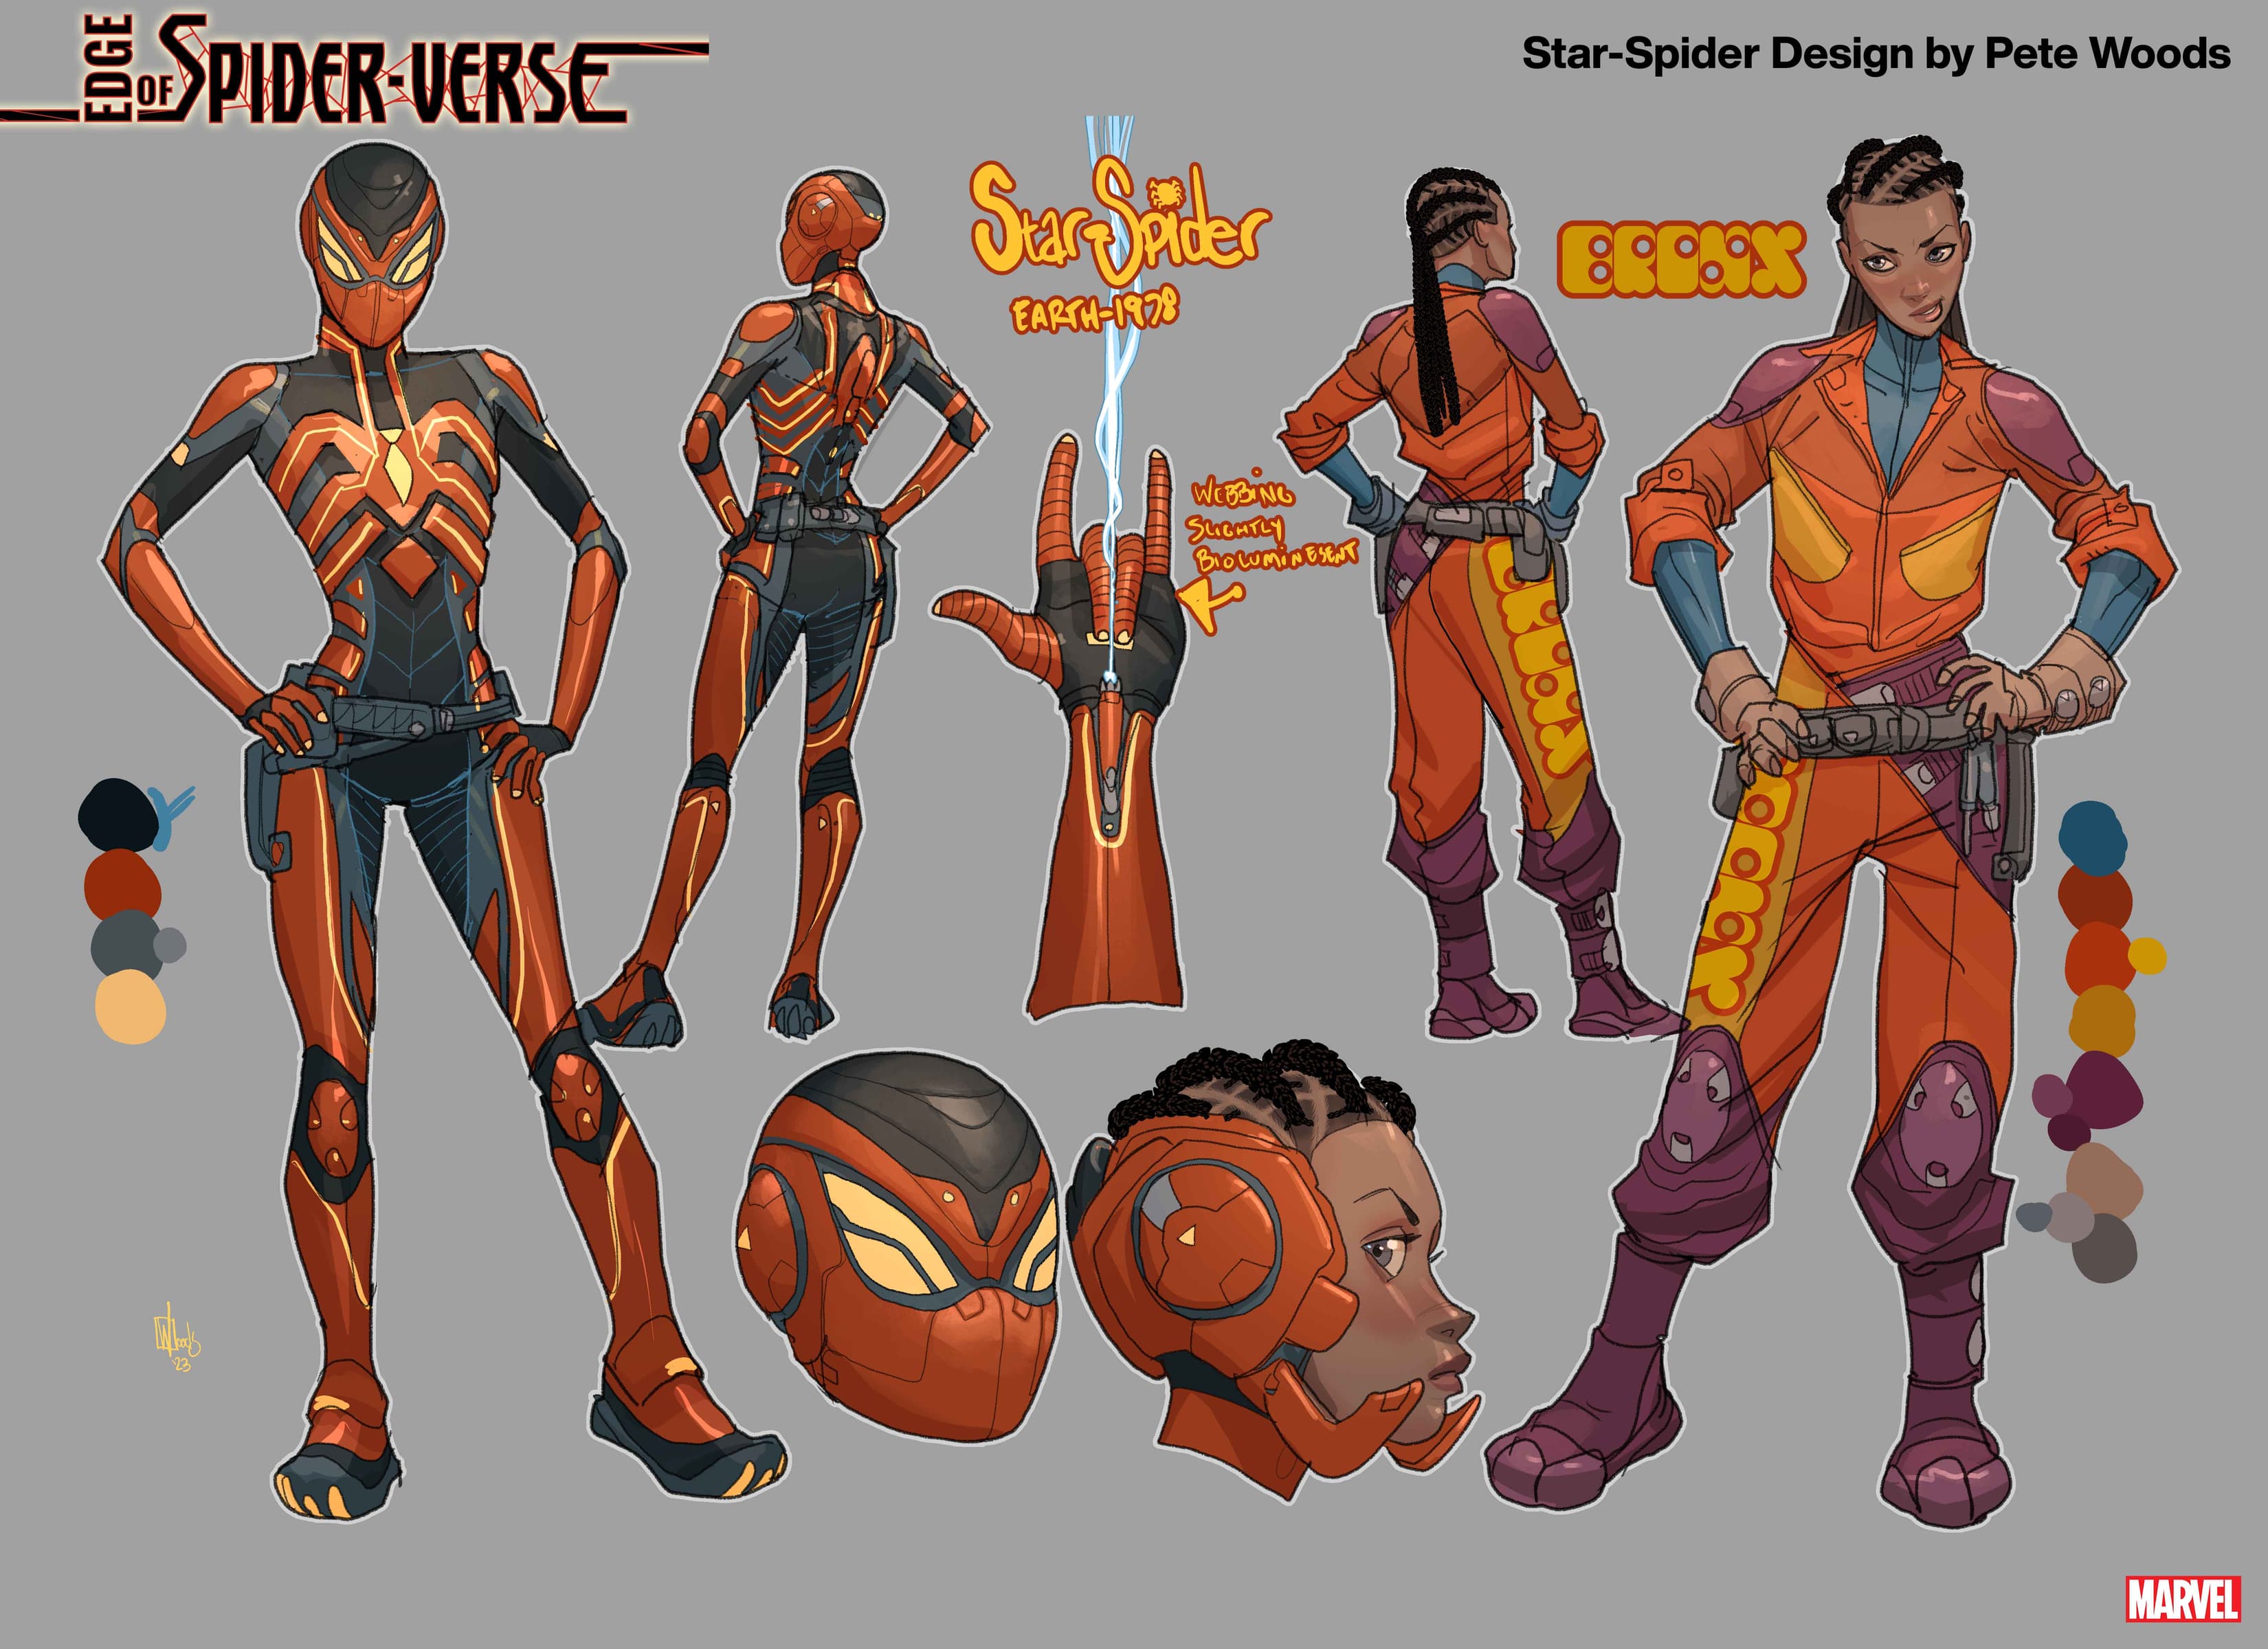 EDGE OF SPIDER-VERSE: Star-Spider character design by Pete Woods